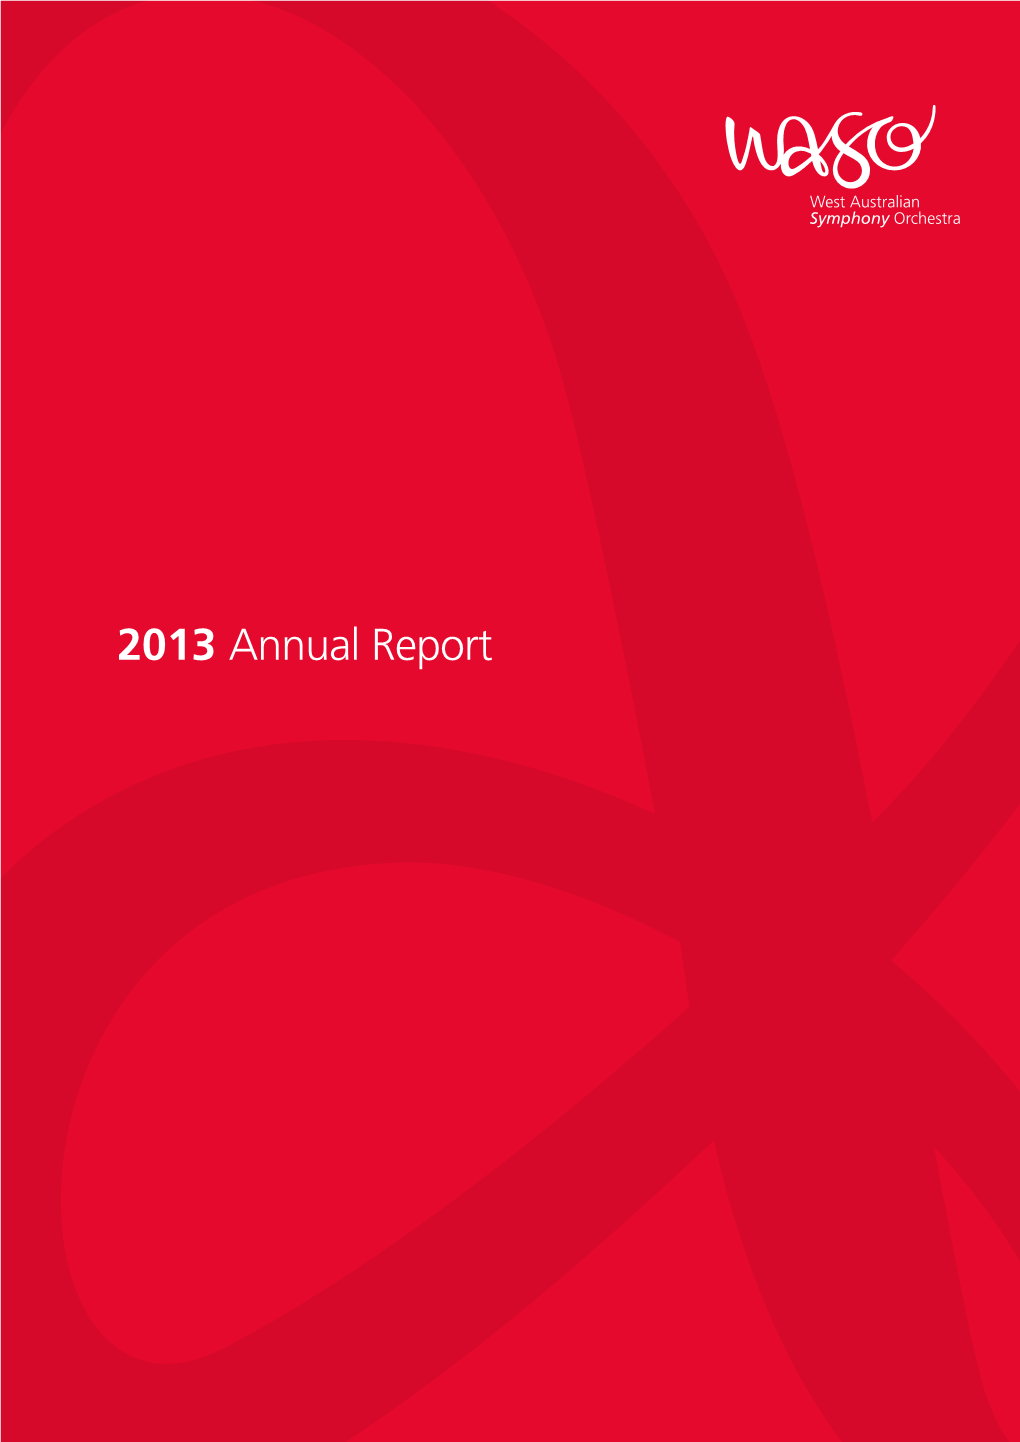 2013 Annual Report Contents